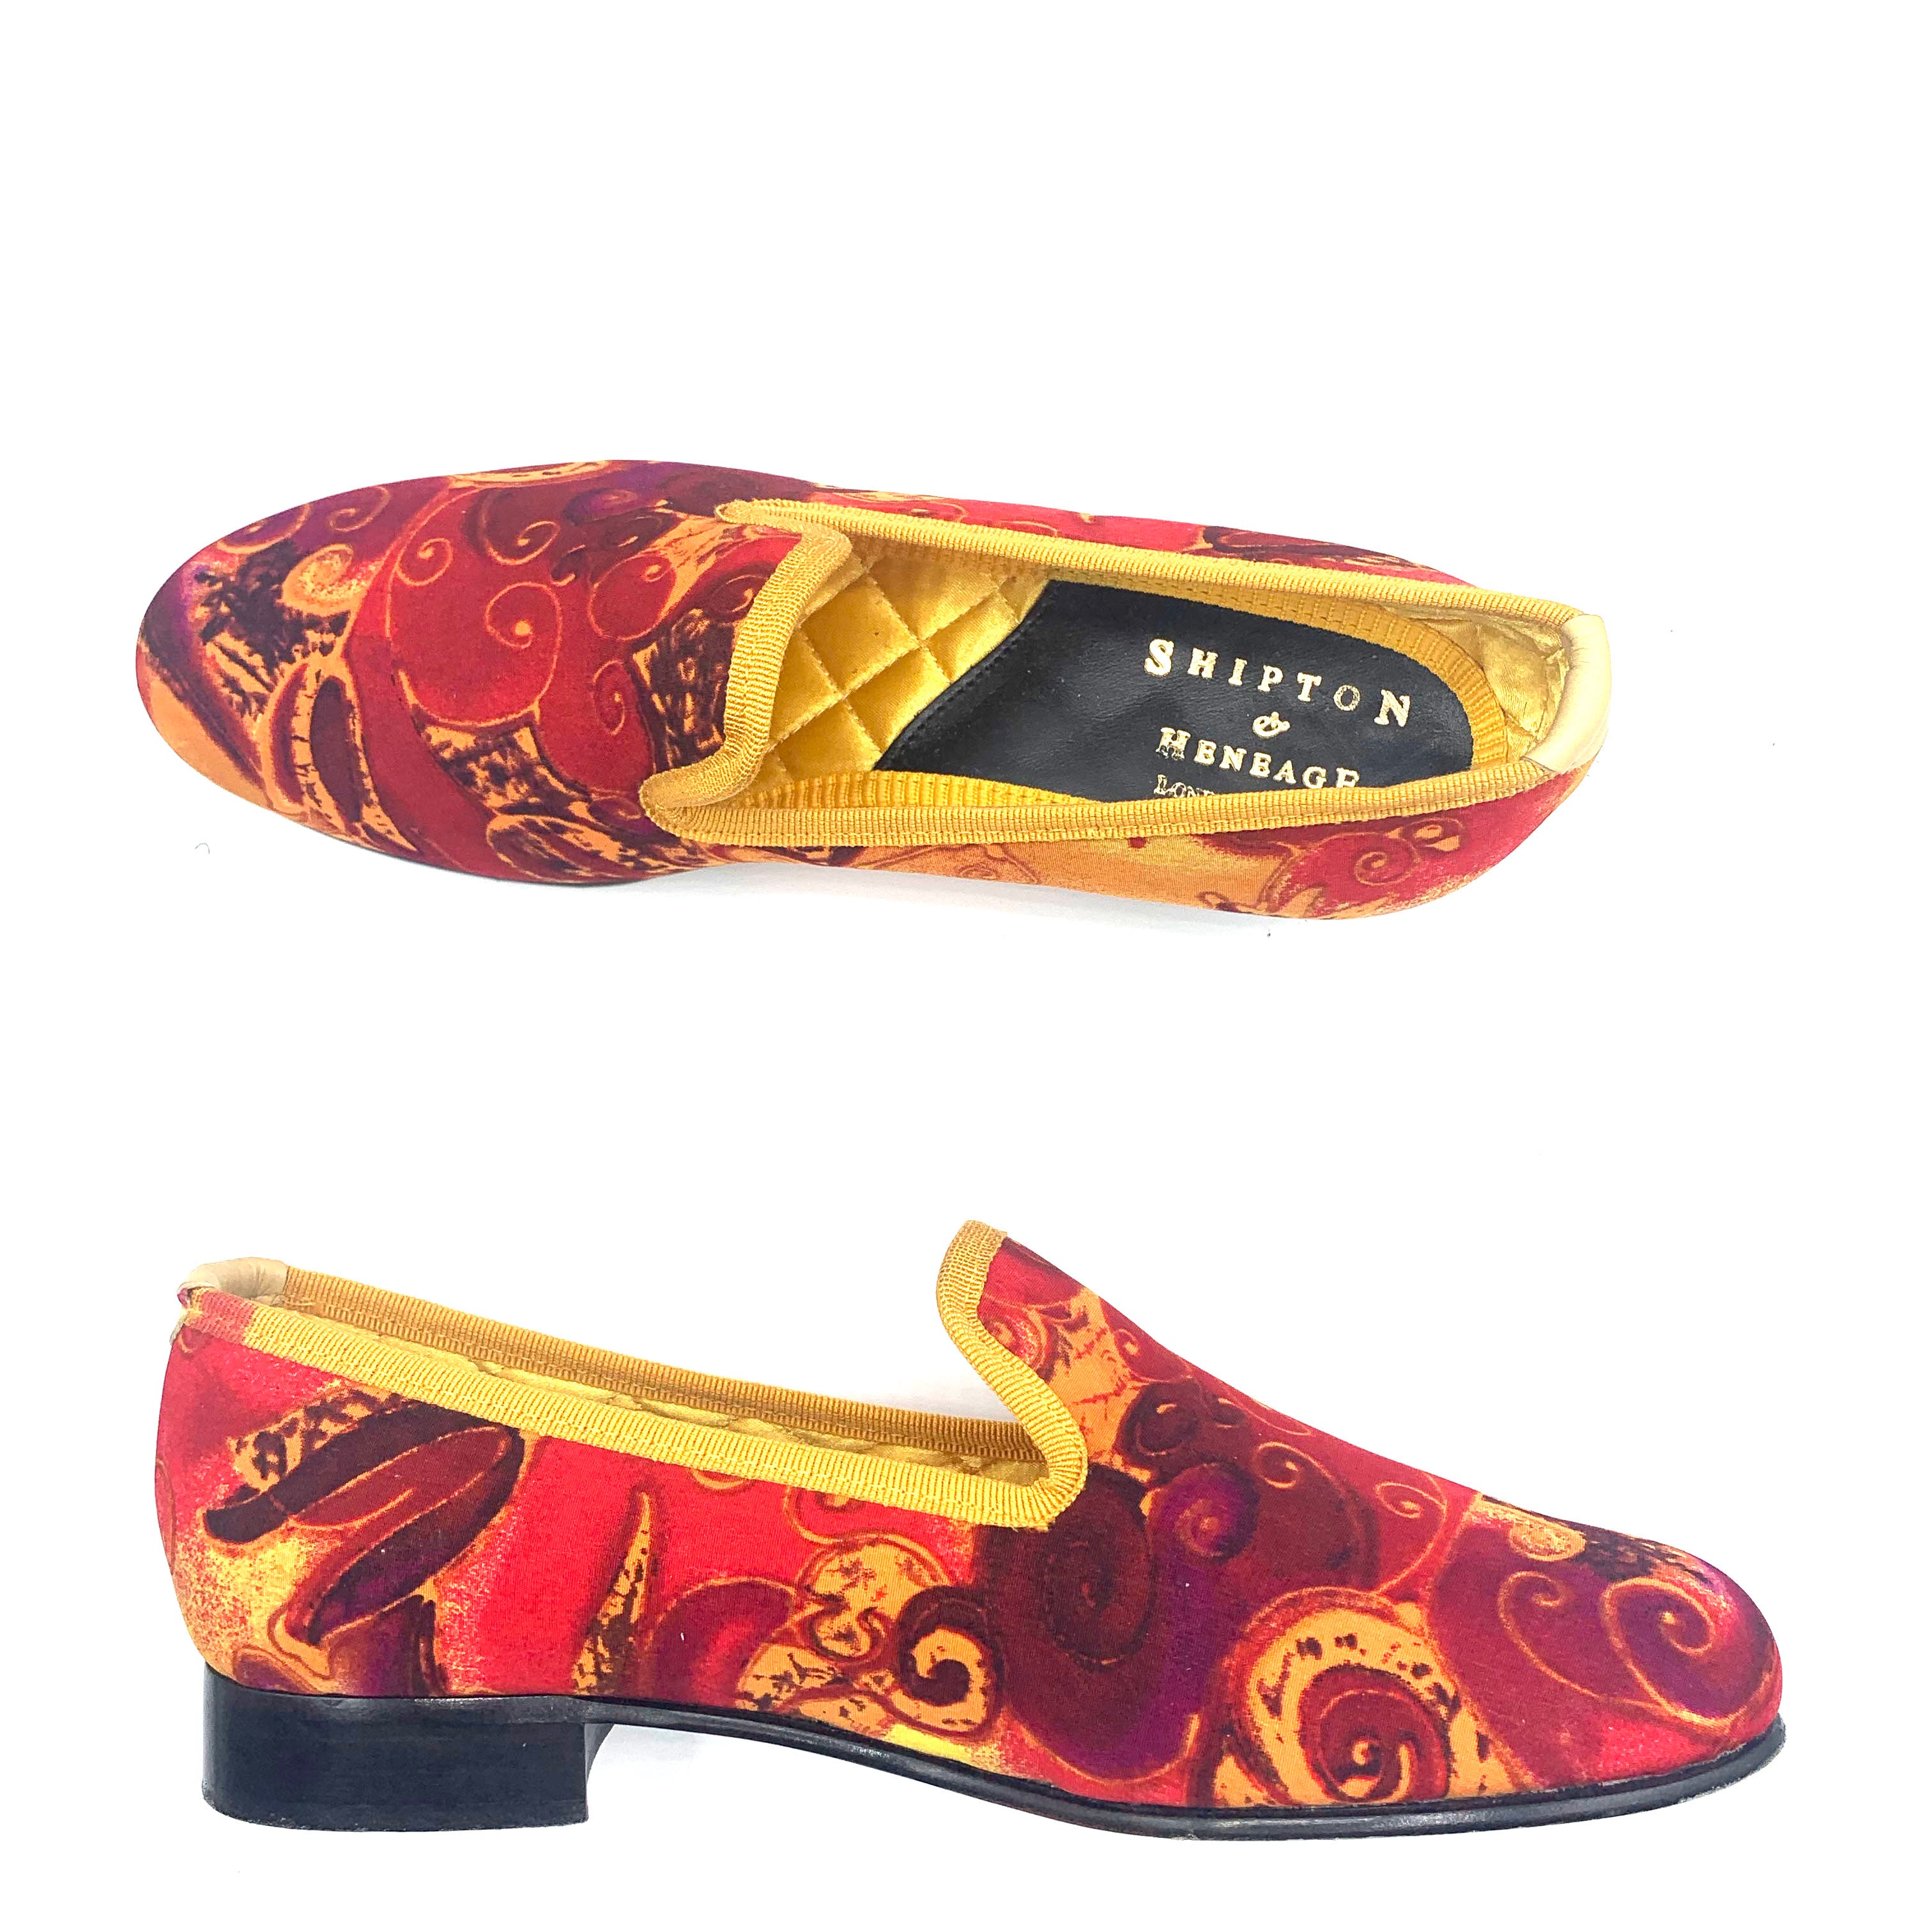 Shipton and Heneage  Bespoke Red and Gold Slippers size 6 1 of 5